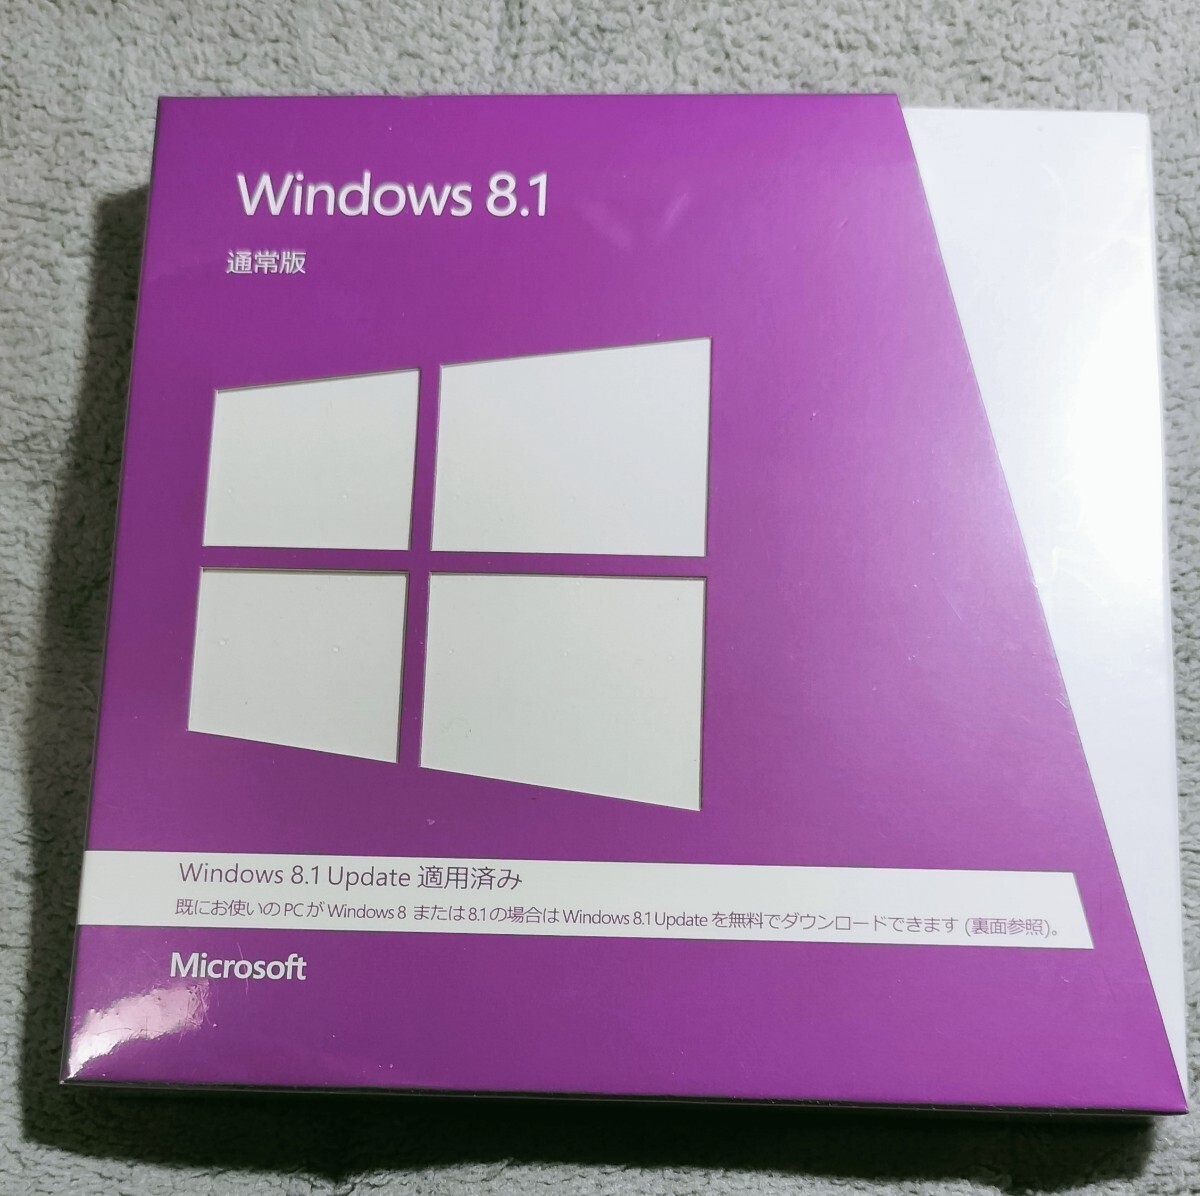 *Windows8.1 package version unopened 32bit 64bit Windows10Home. free of charge up te-to possible USB memory pick up is possible to do (^^)